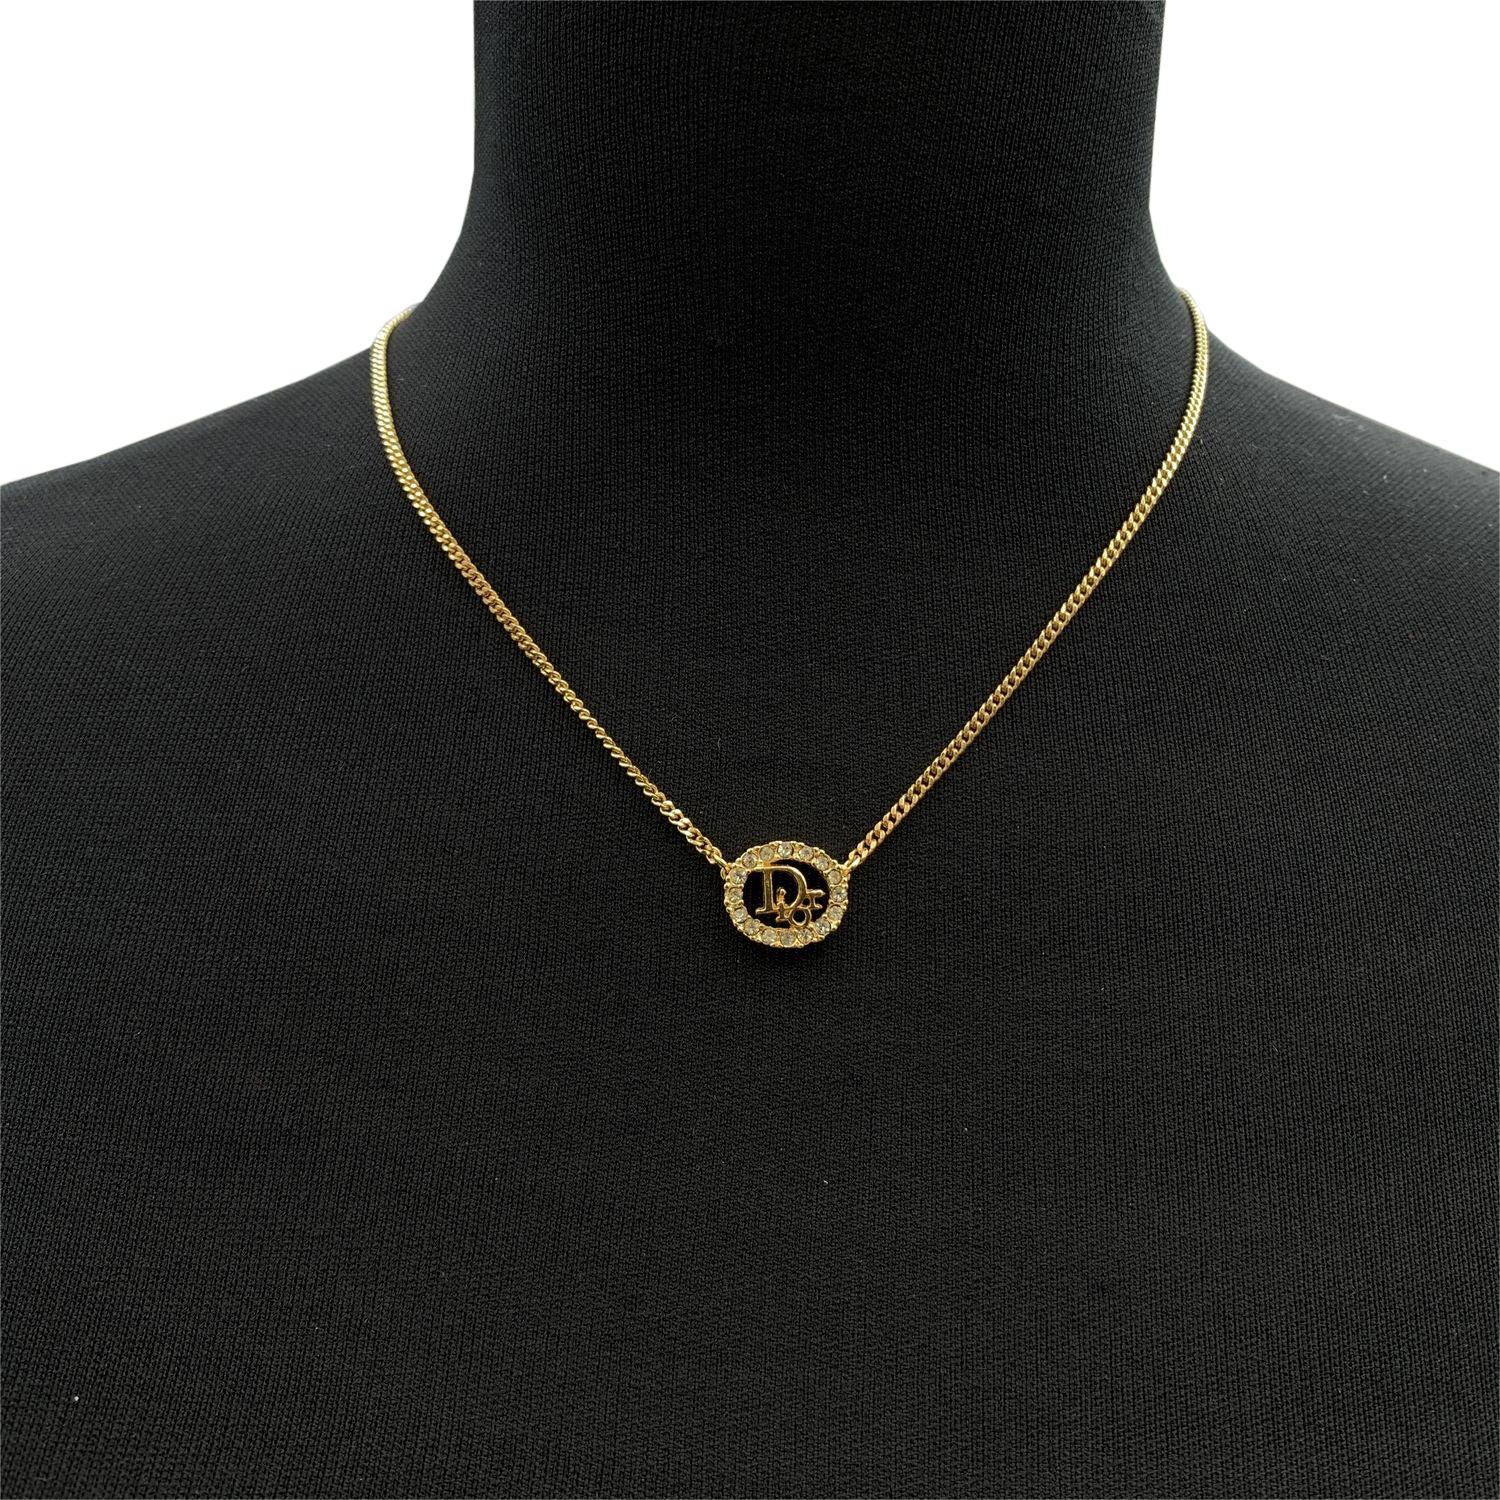 Vintage Christian Dior gold metal chain necklace. Oval Dior logo pendant with crystal accents. Lobster closure. CD small charm at the end of the chain (marked Chr.Dior Chain length: about 16 inches - 40.5 cm. Made in Germany. Condition A - EXCELLENT